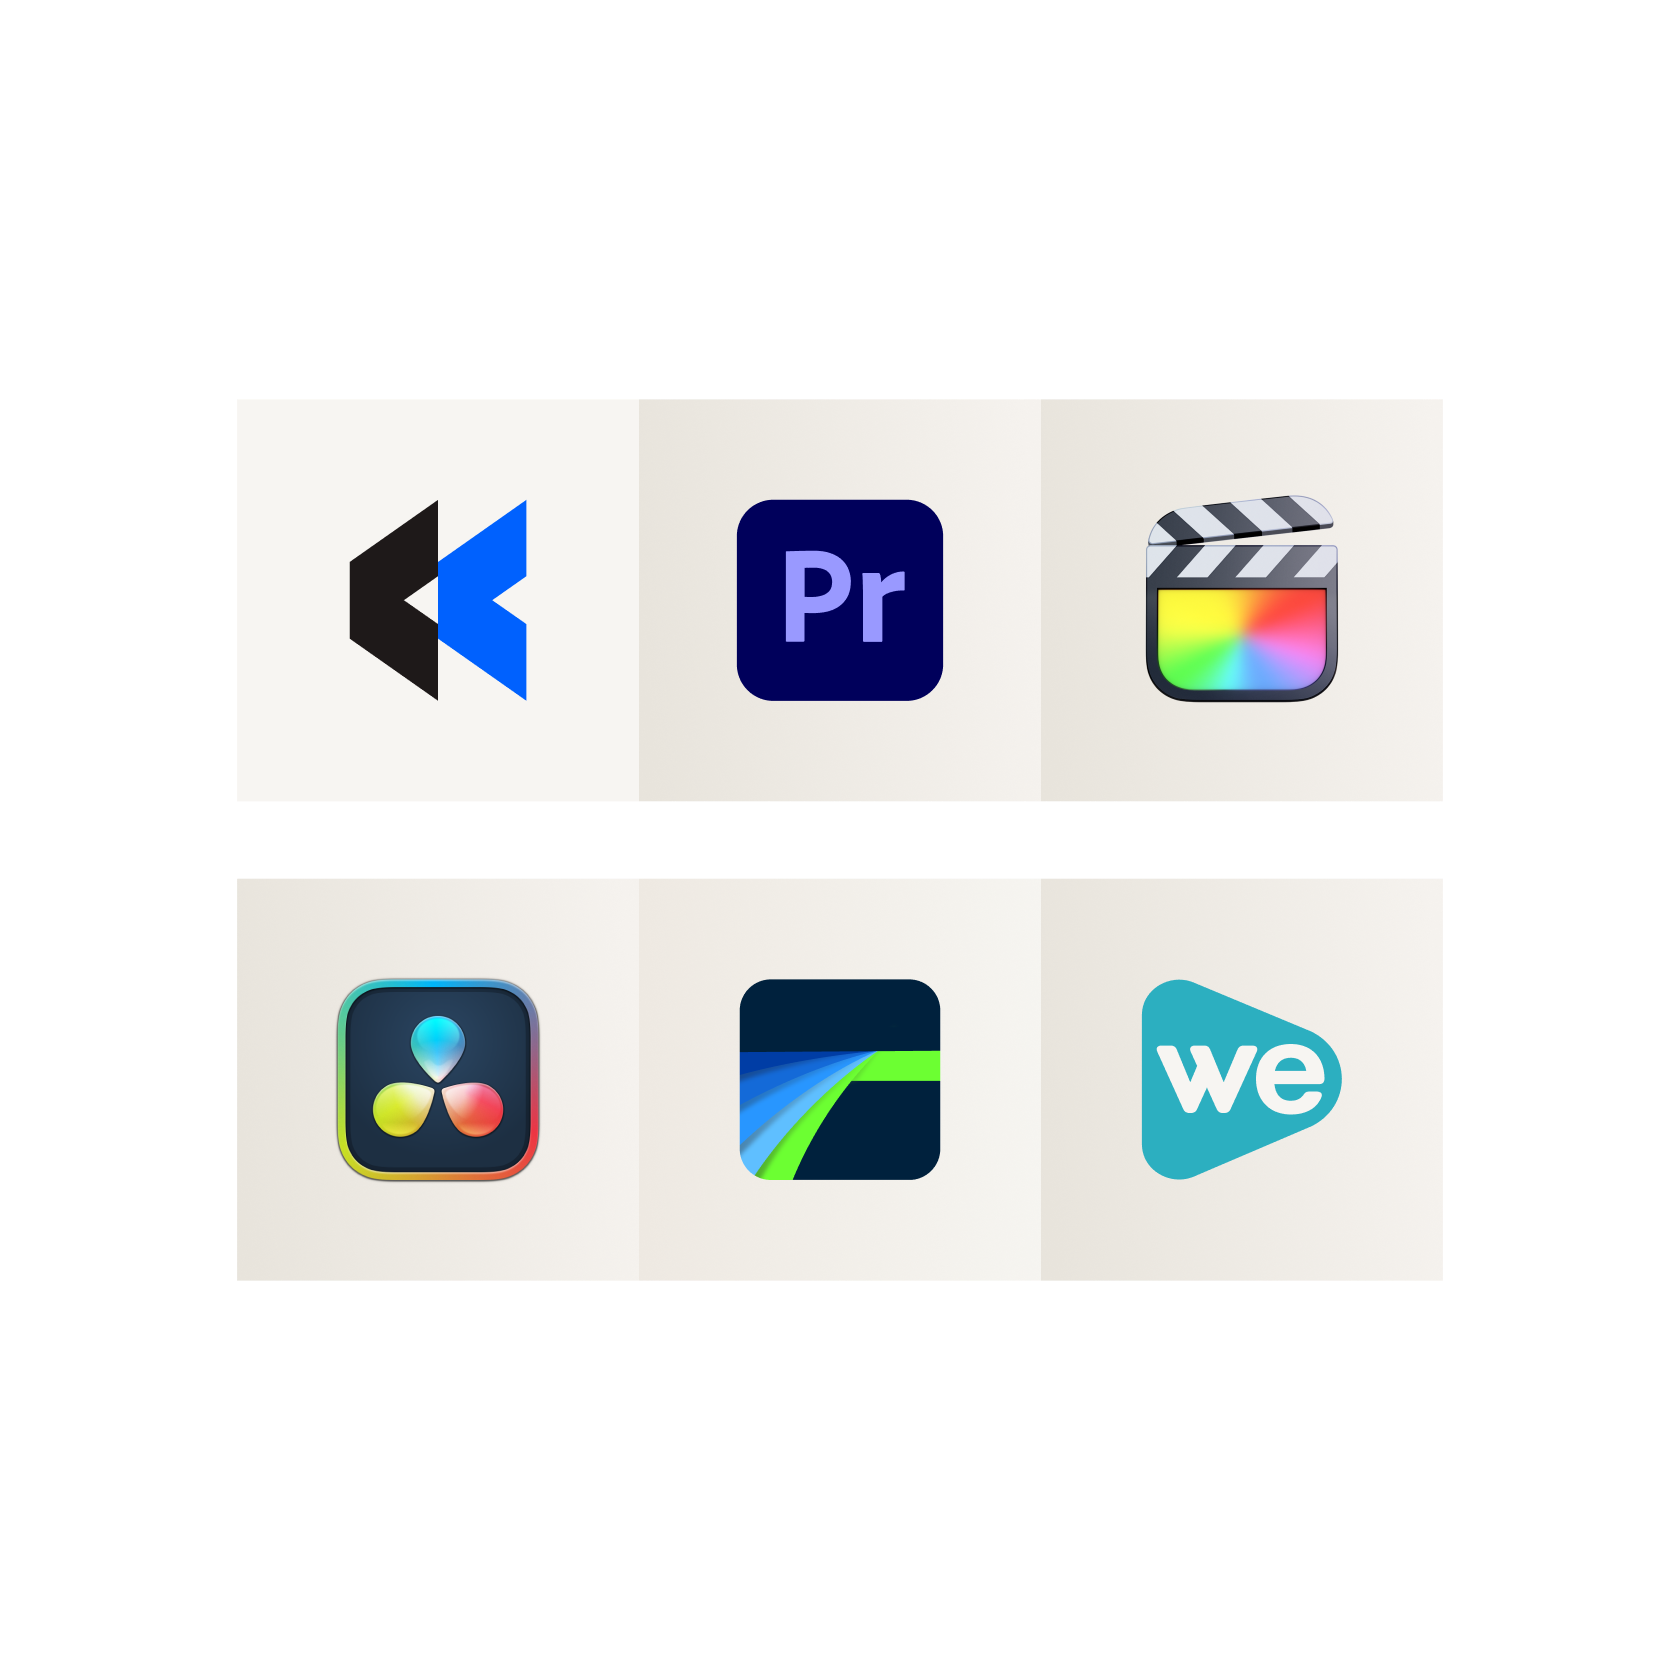 Icons of other video editing software including Adobe Premiere Pro